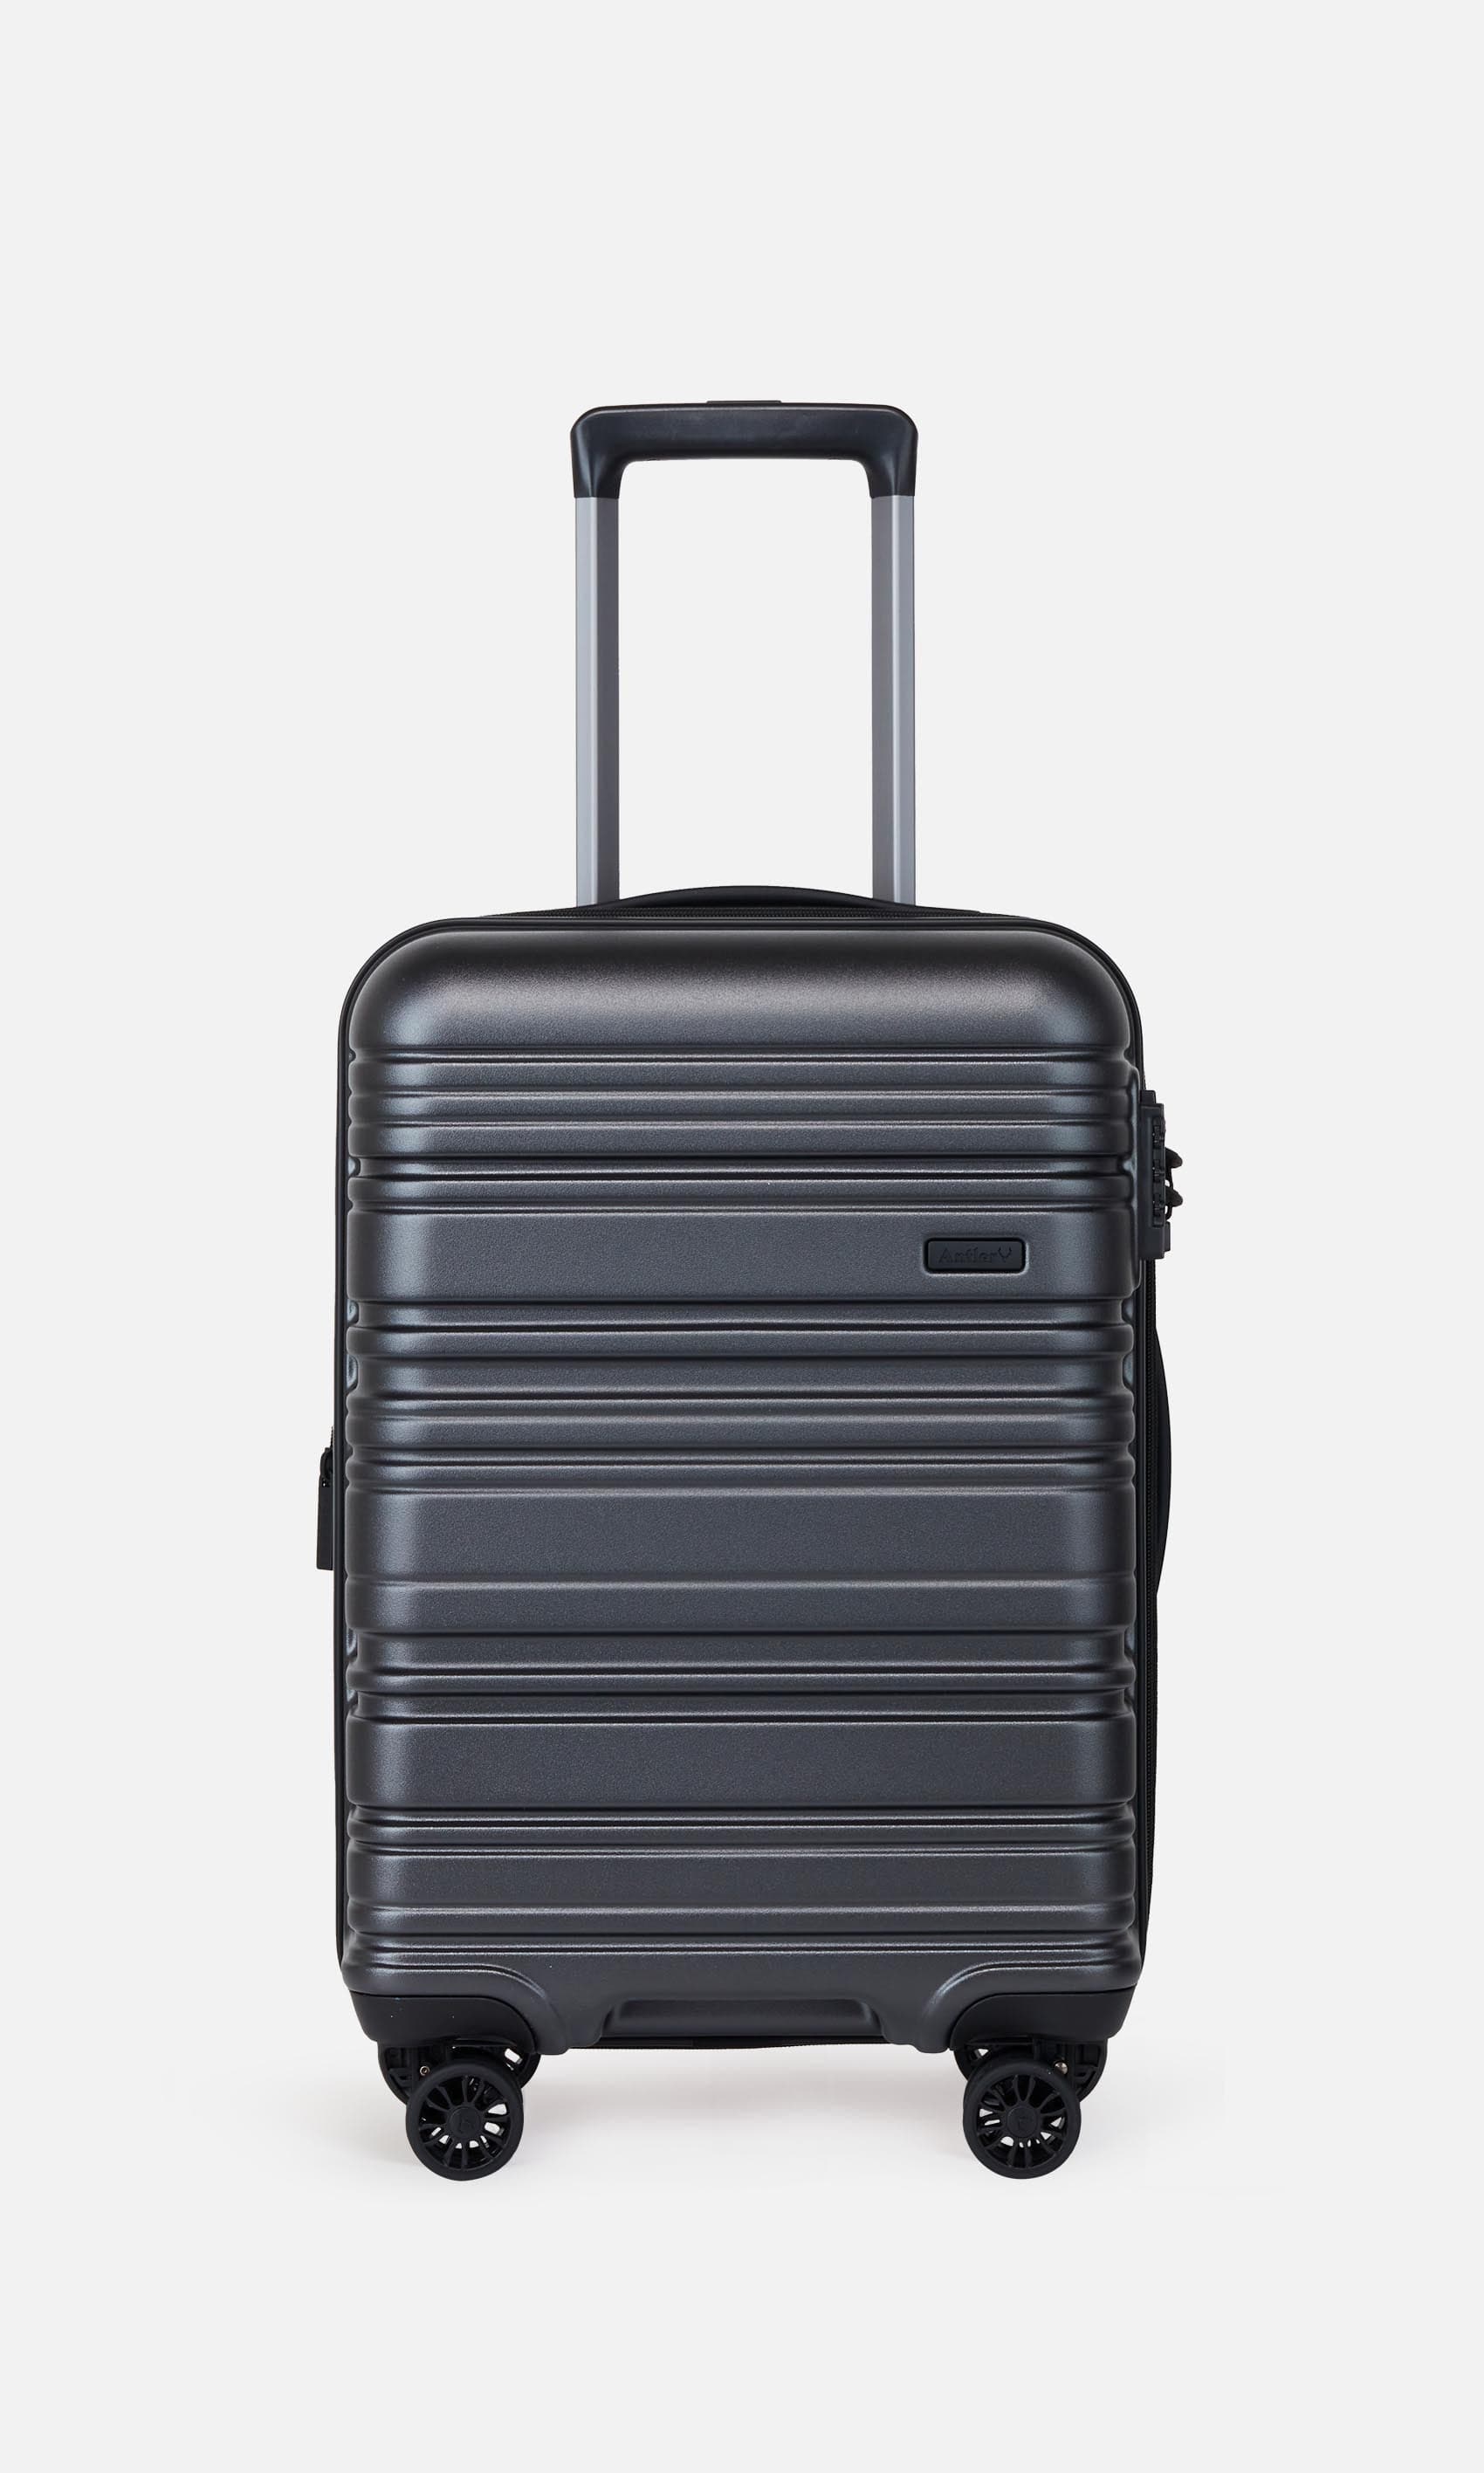 View Antler Saturn Cabin Suitcase In Charcoal Size 36 x 545 x 245 cm information